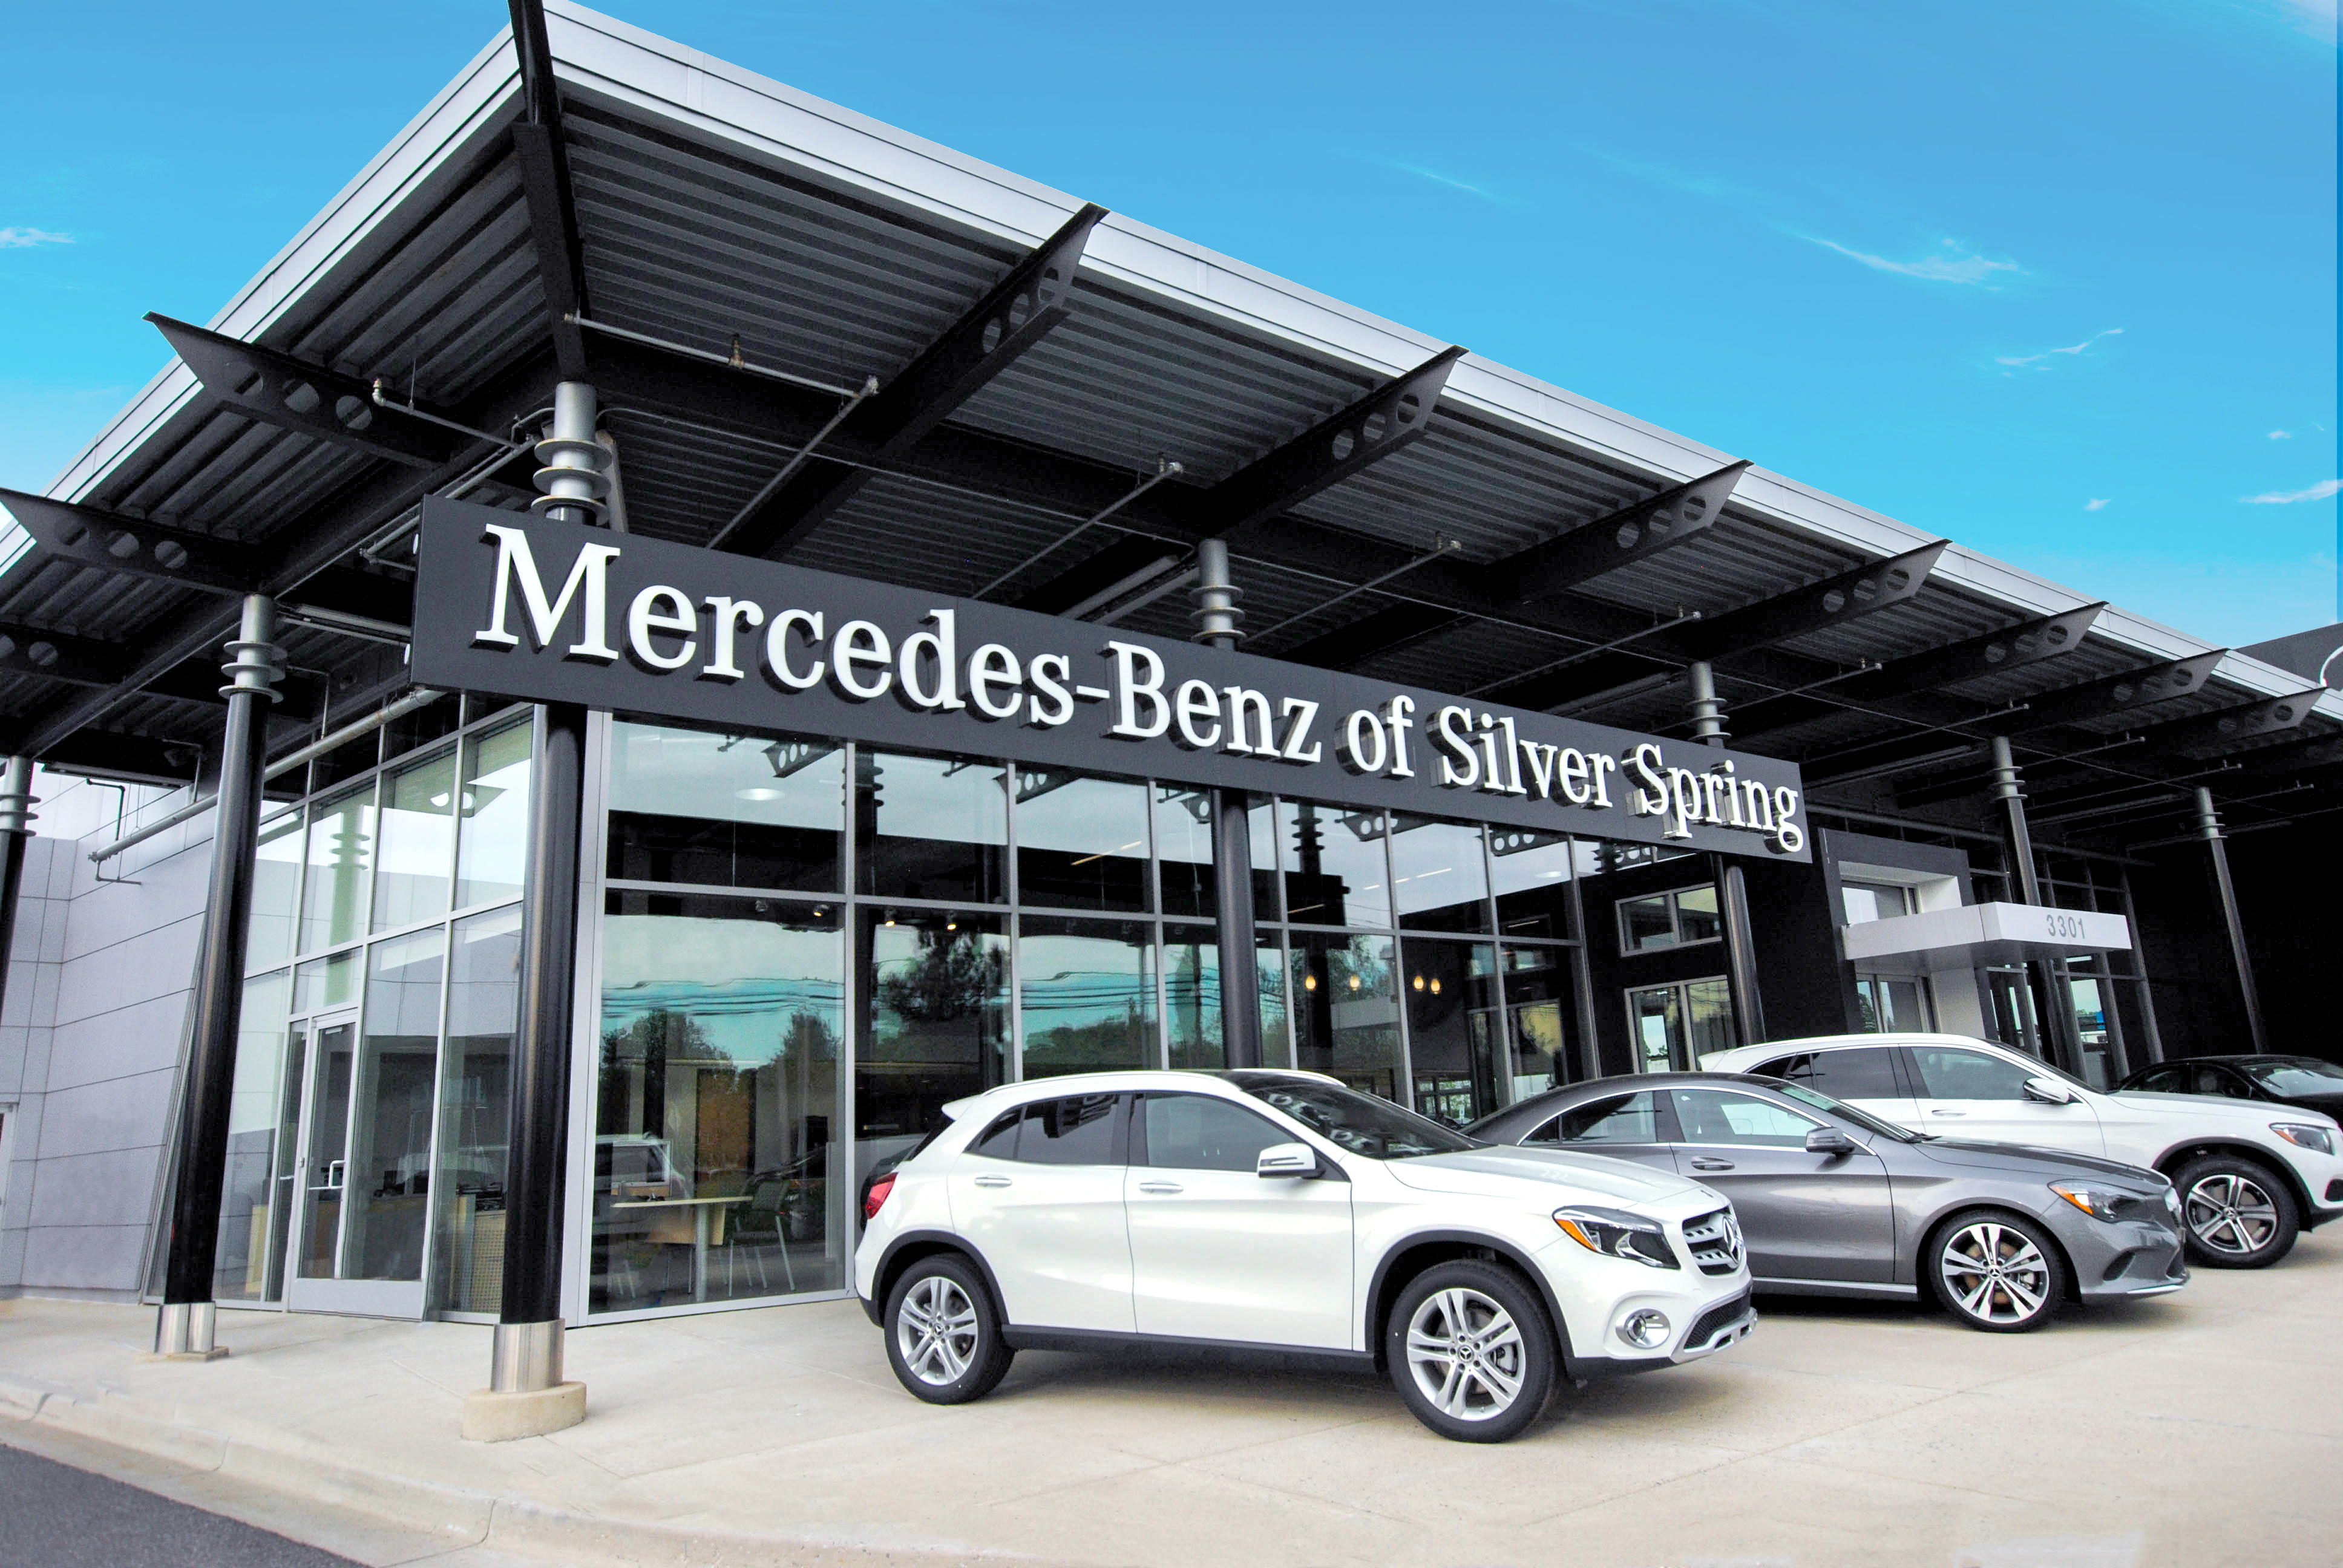 Image 2 | Mercedes-Benz of Silver Spring